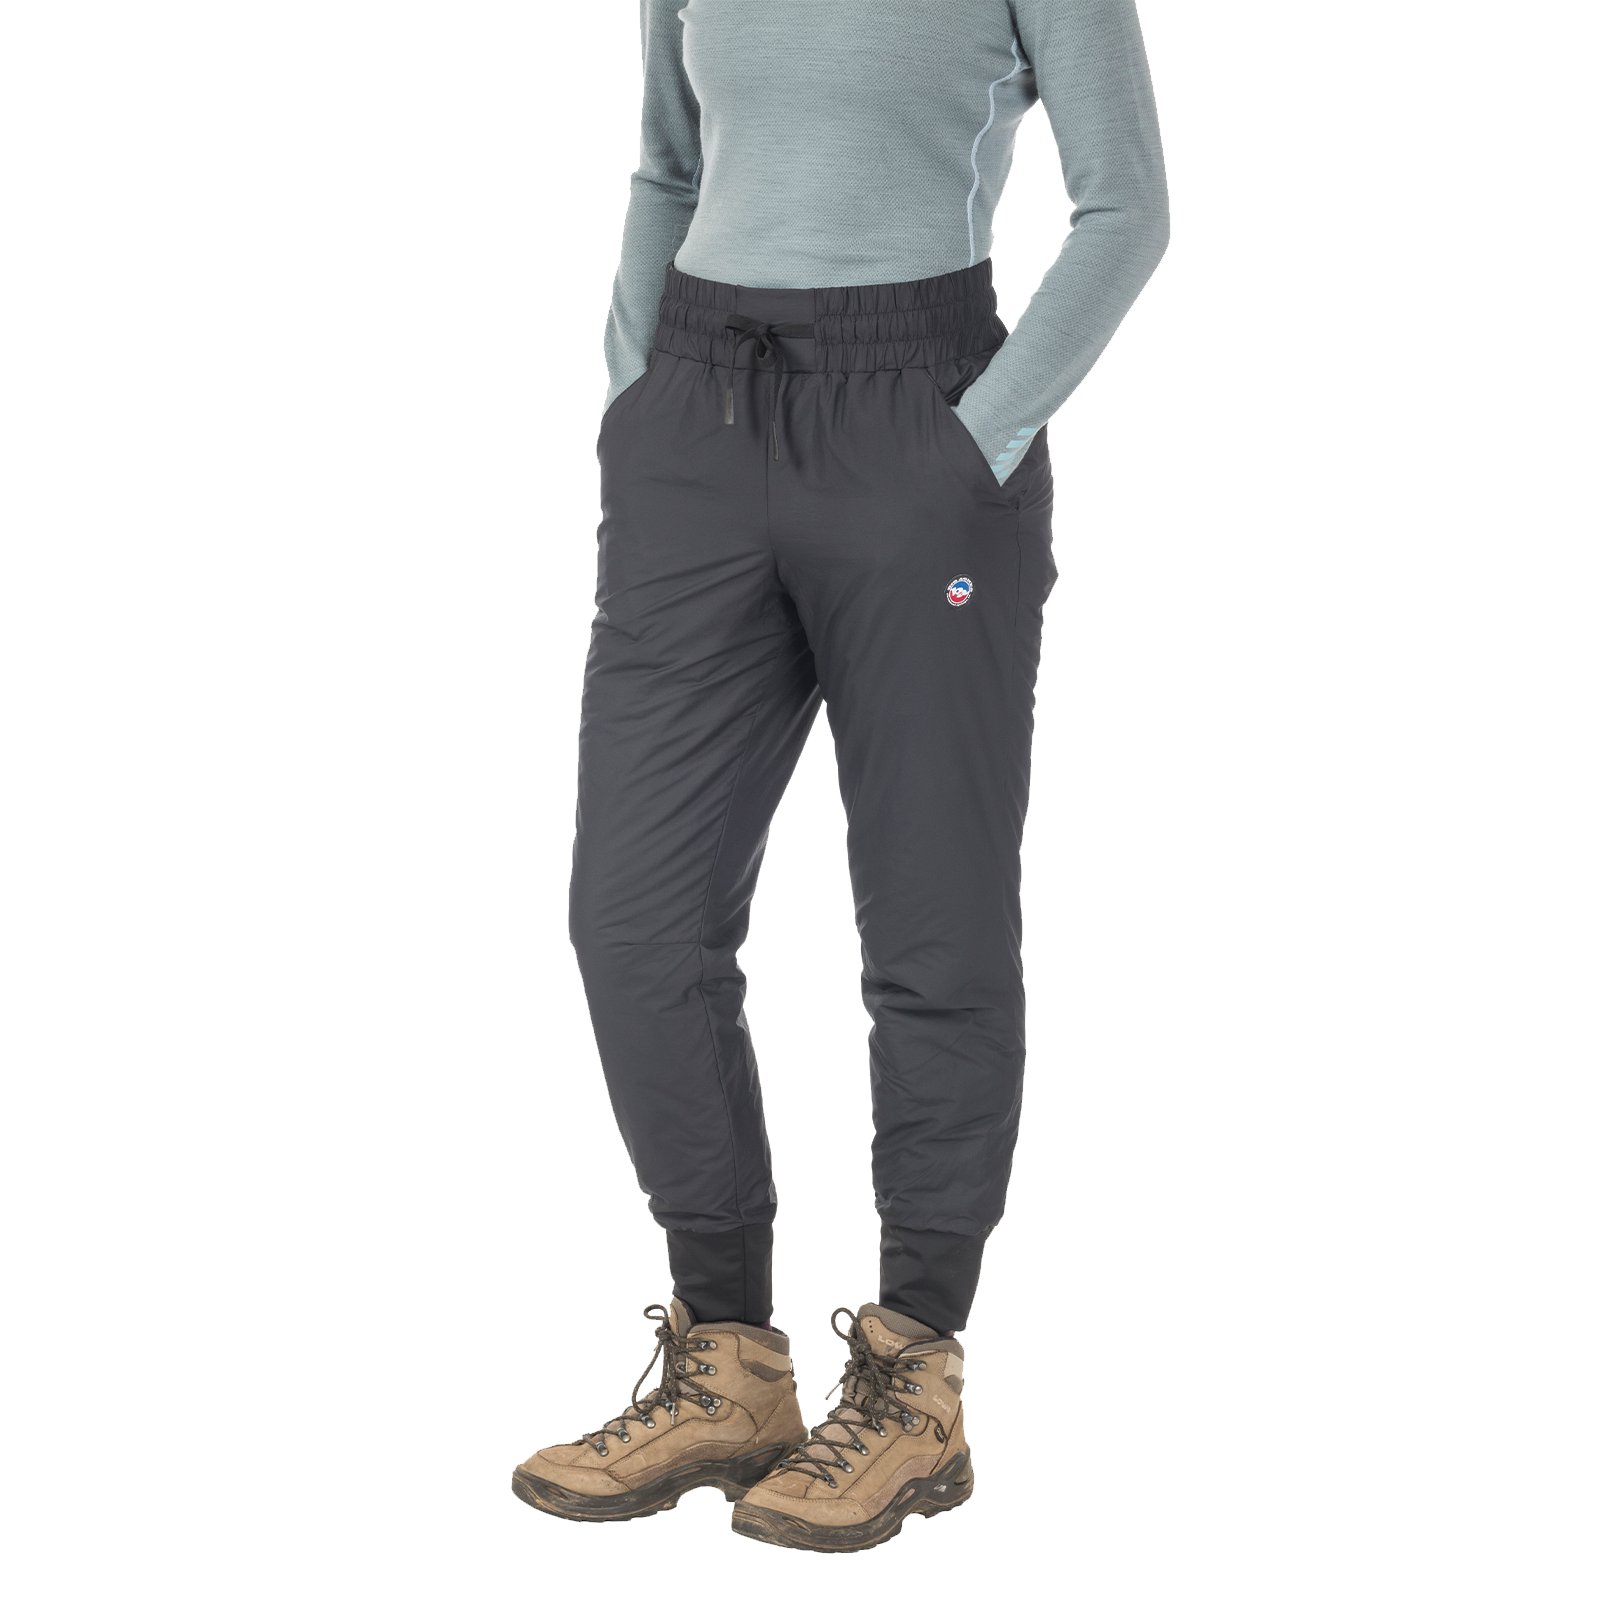  Womens Hiking Pants Quick Dry Water Resistant Lightweight  Joggers Pant For All Seasons Elastic Waist Steel Gray Size XL